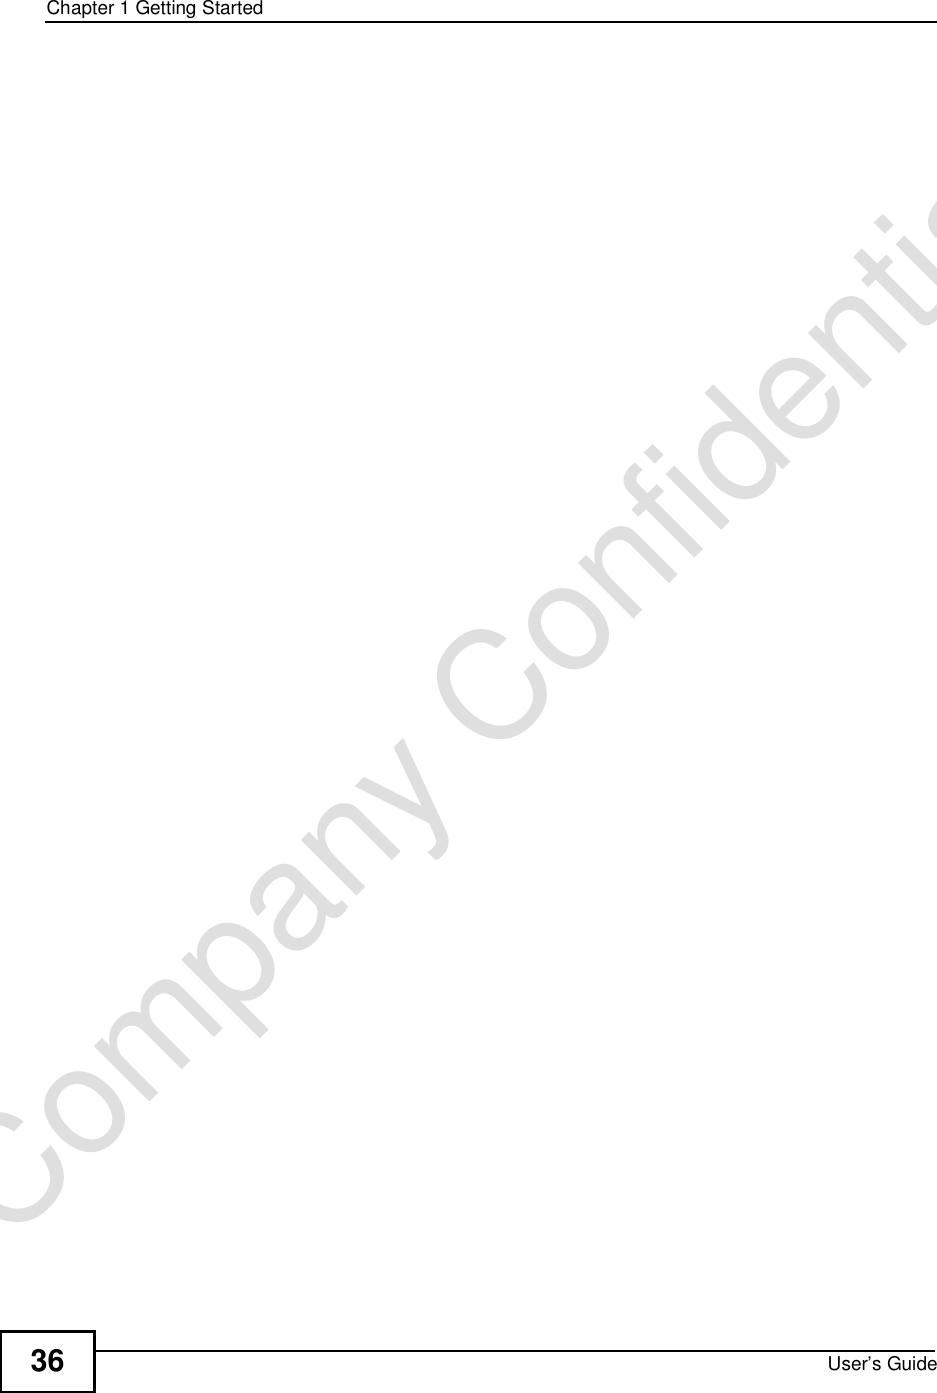 Chapter 1Getting StartedUser’s Guide36Company Confidential